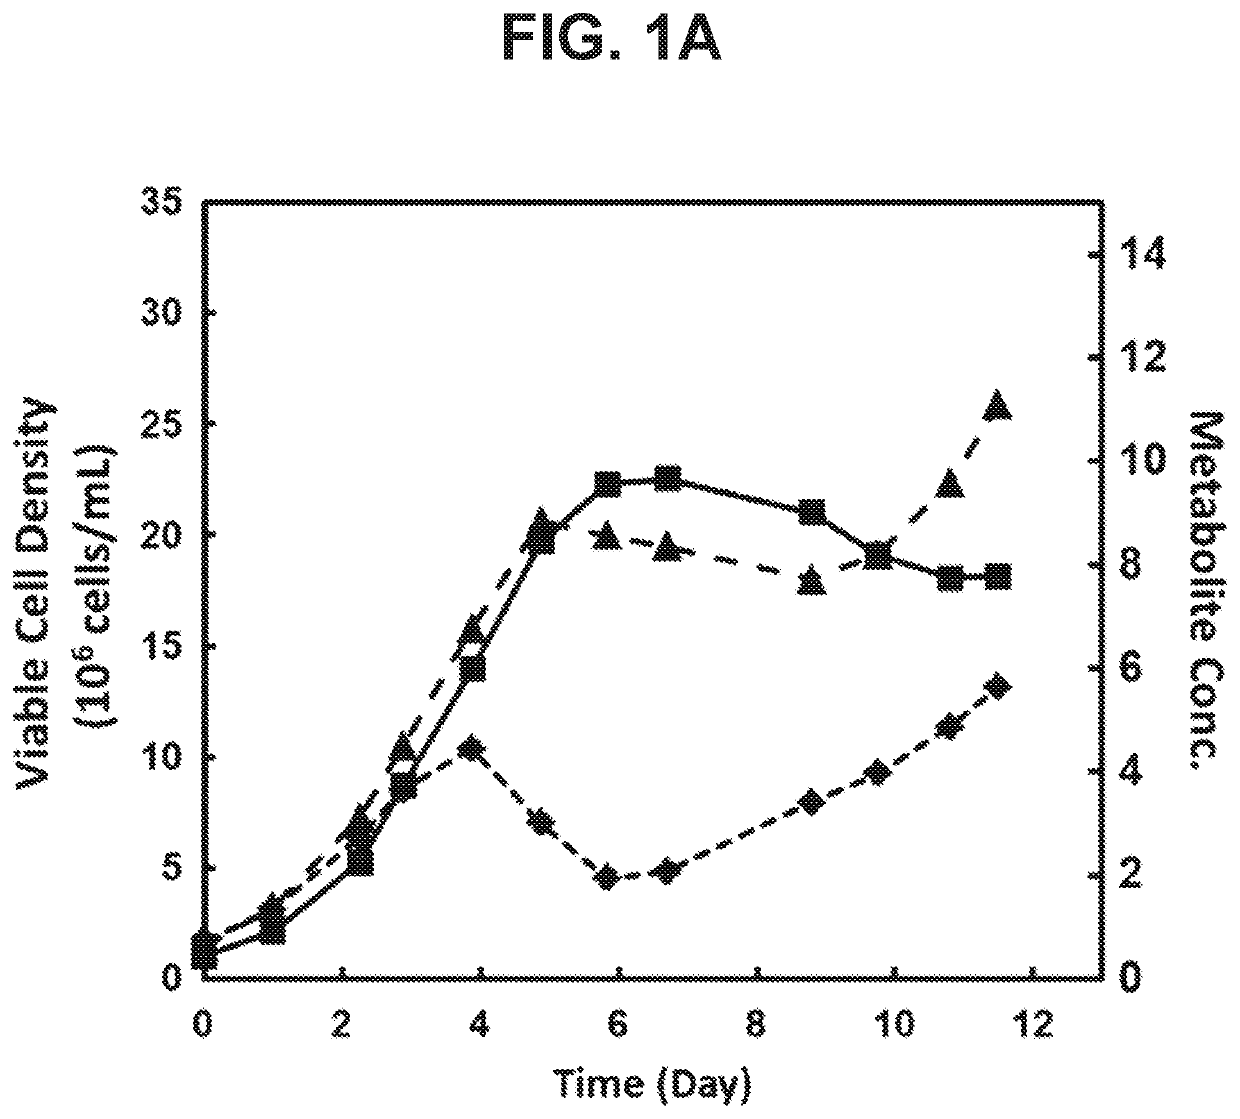 Cells with reduced inhibitor production and methods of use thereof